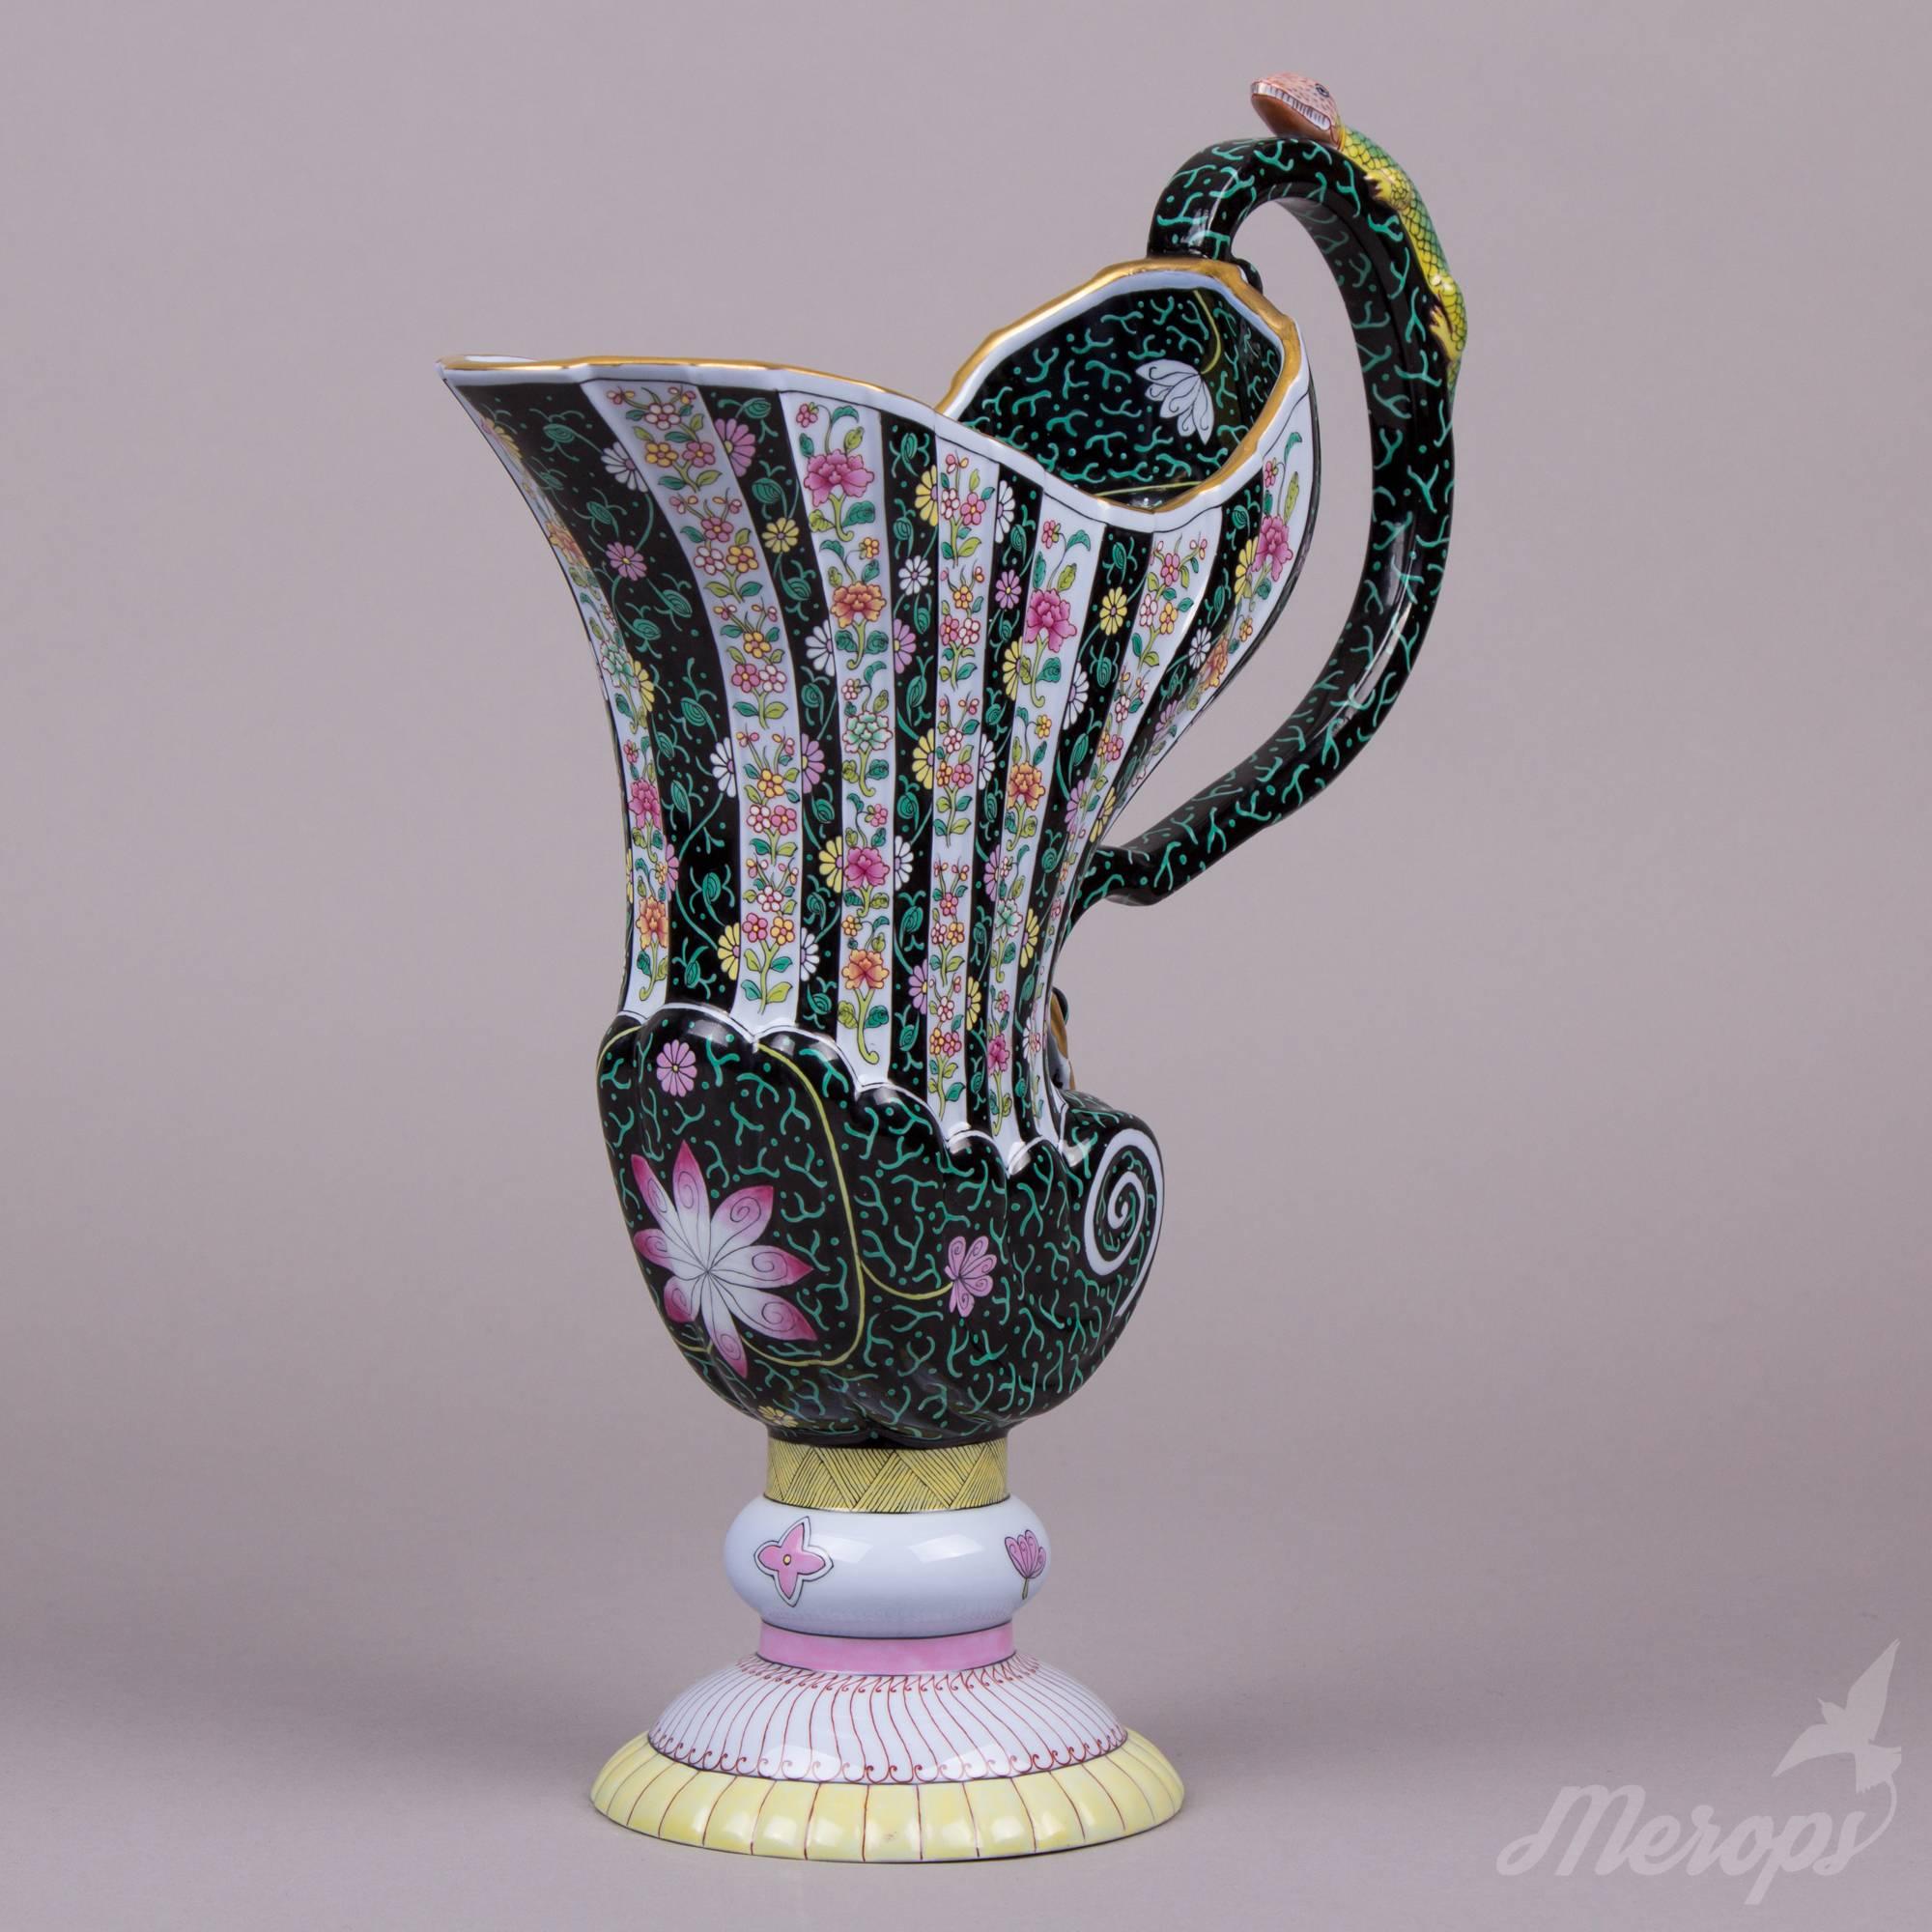 We ship this item worldwide for 80 USD with insurance. Shipping usually takes 3-7 business days. Express shipping with FedEx (2 days) available for 150 USD. Manufacturer: Herend Porcelain Manufactory (Hungary). Quality: Hand-painted, 1st class